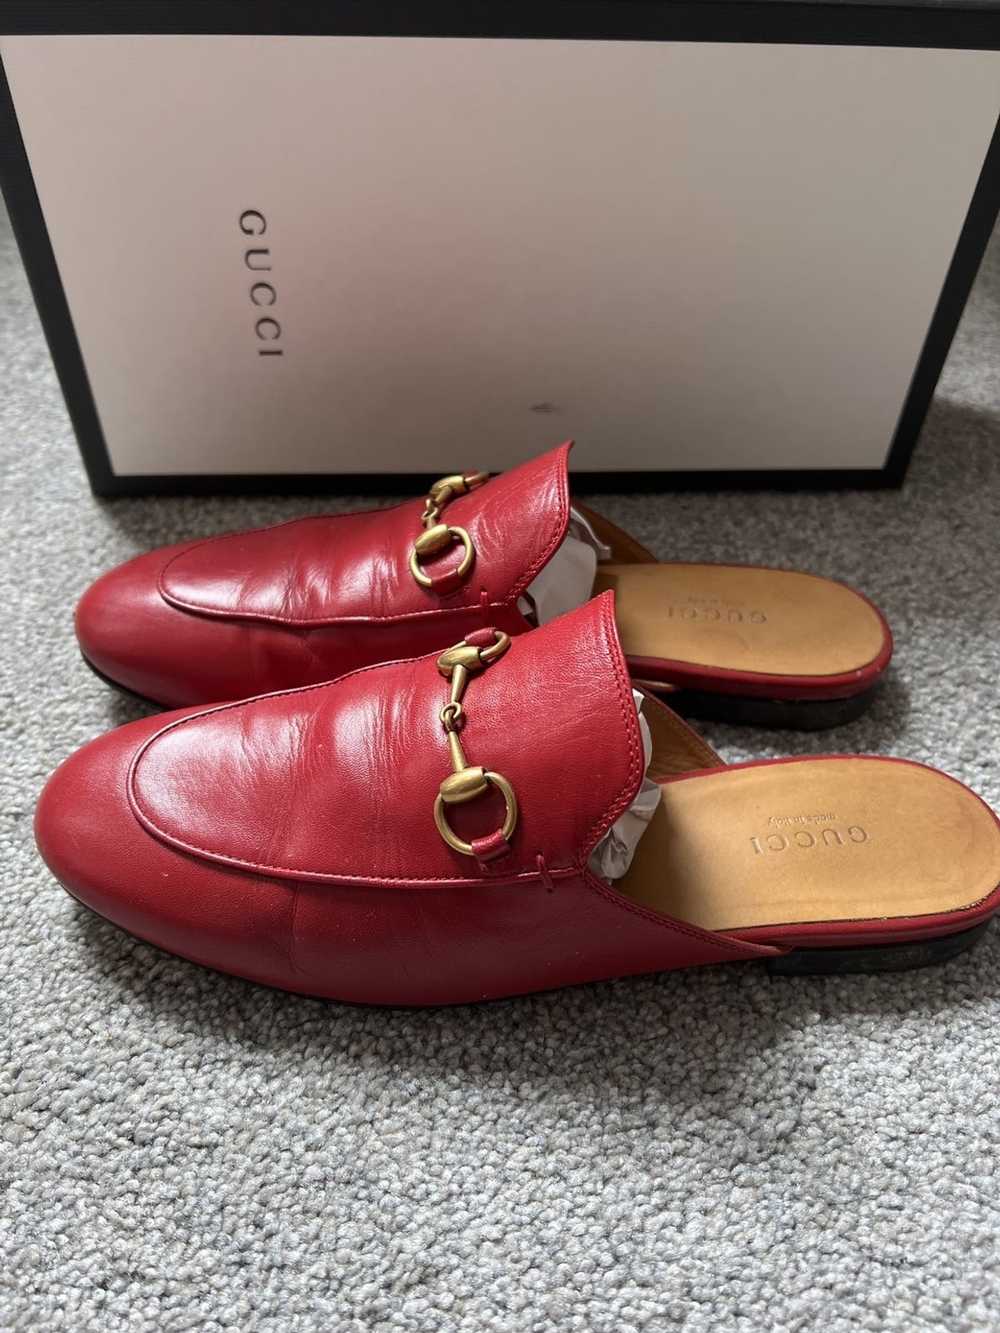 Gucci Gucci princetown leather mule - image 3